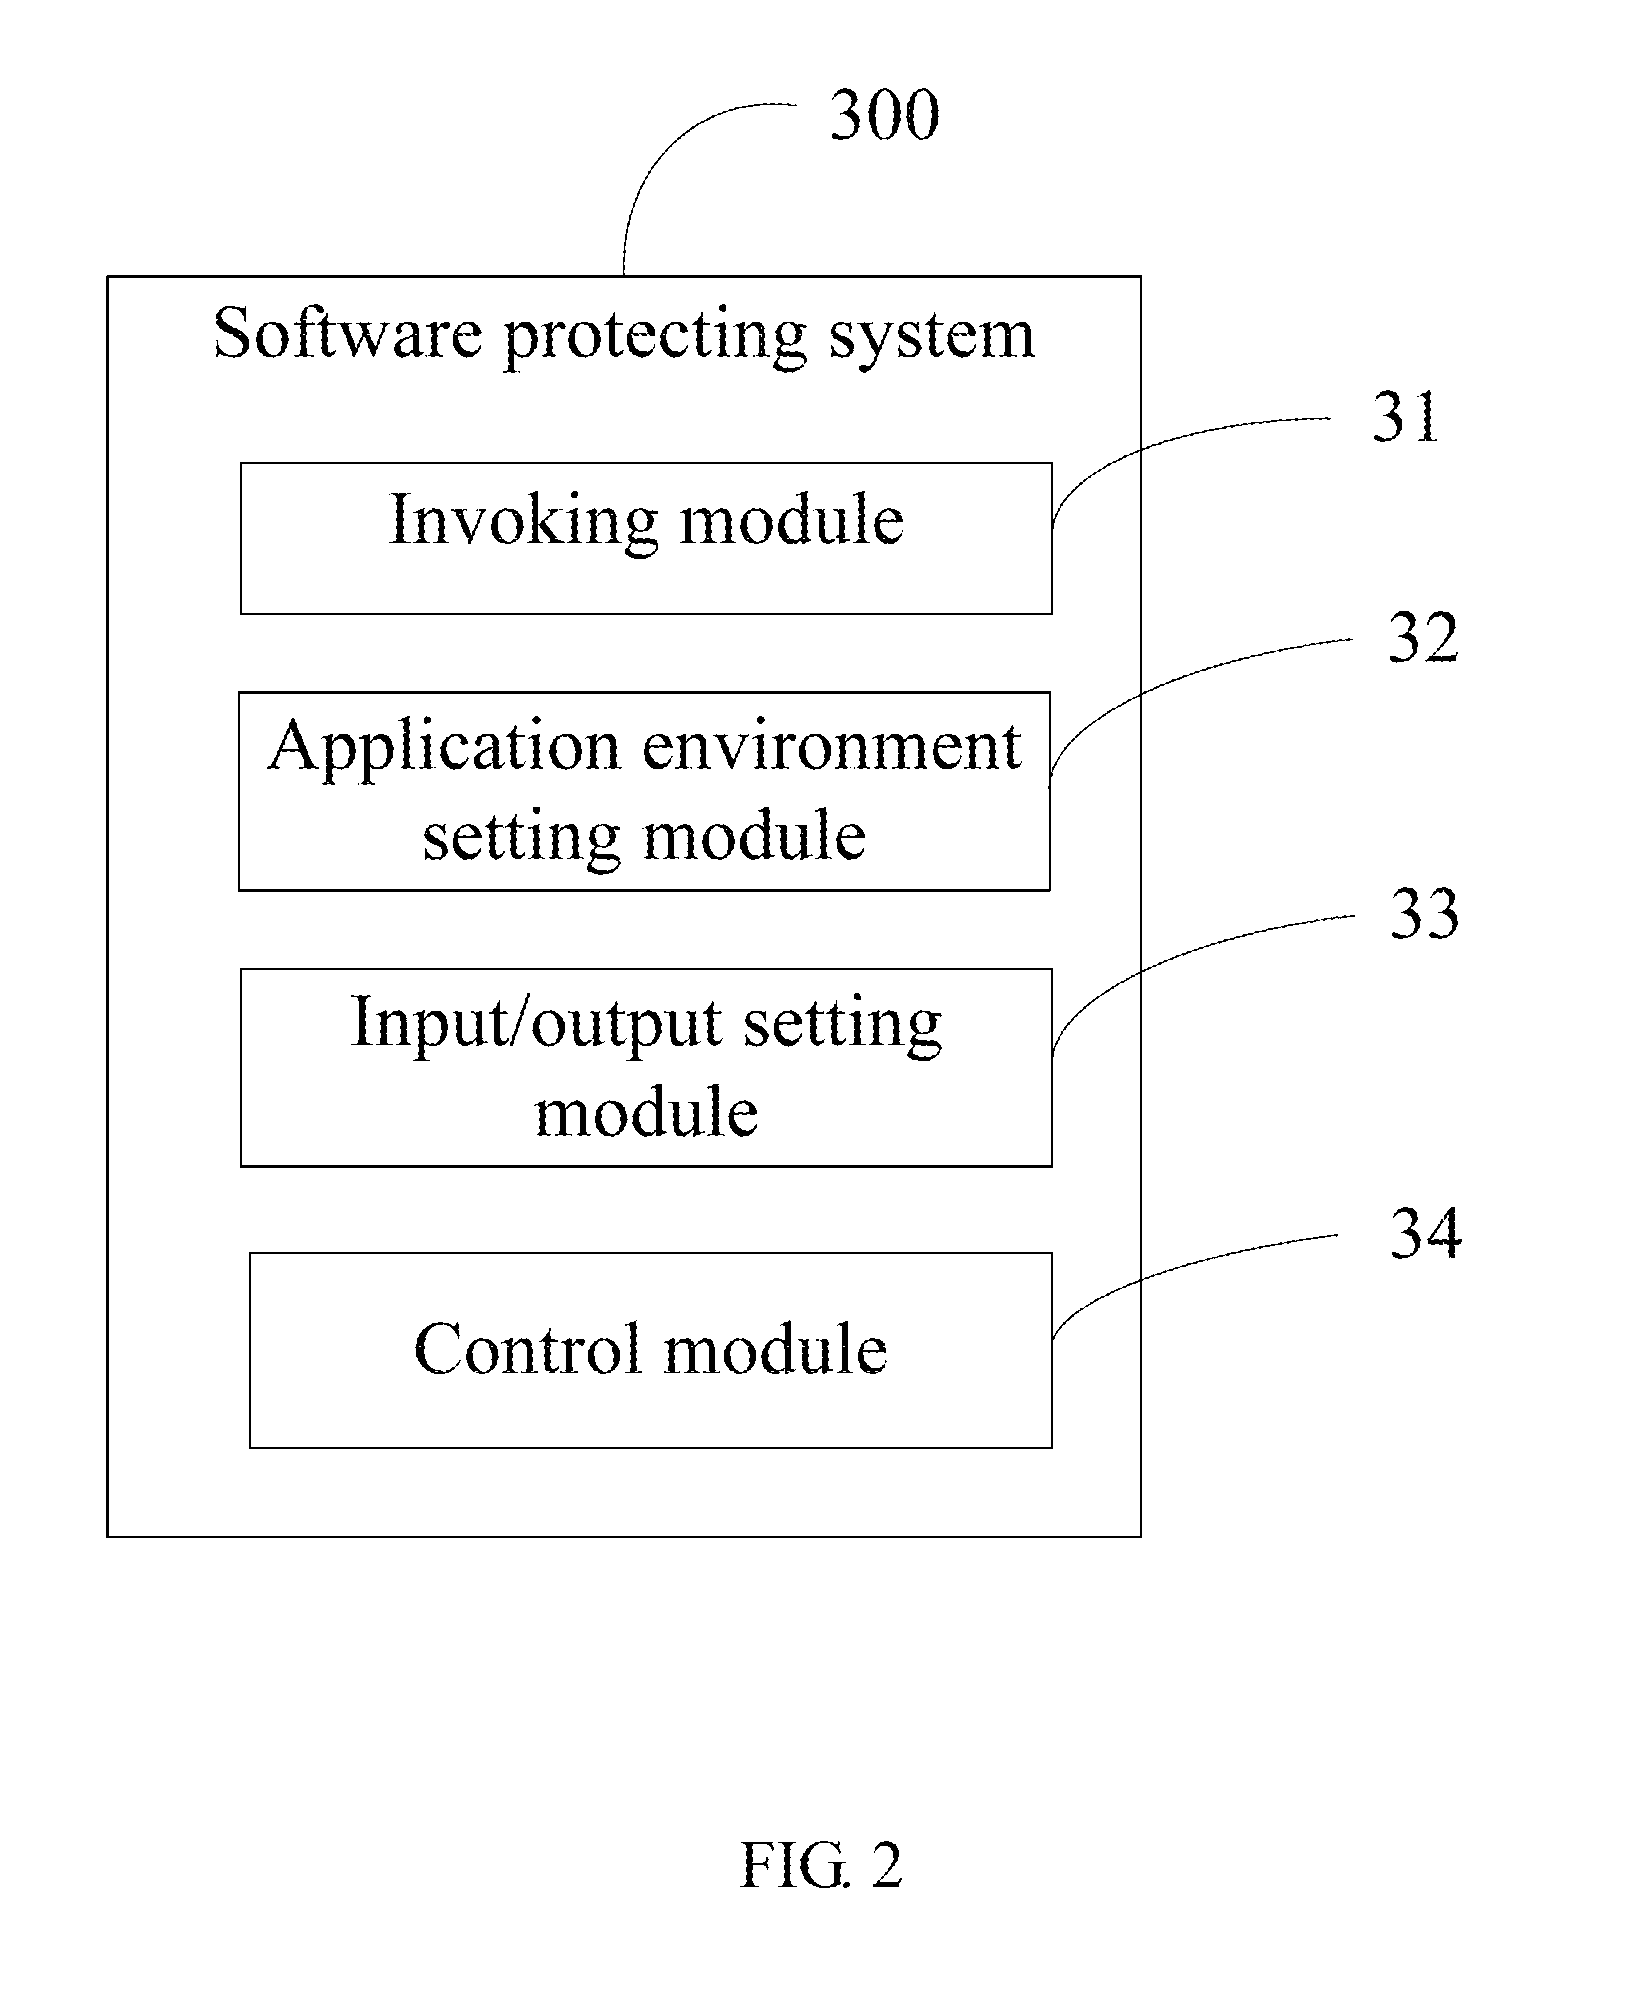 Software protecting system and electronic device using the same